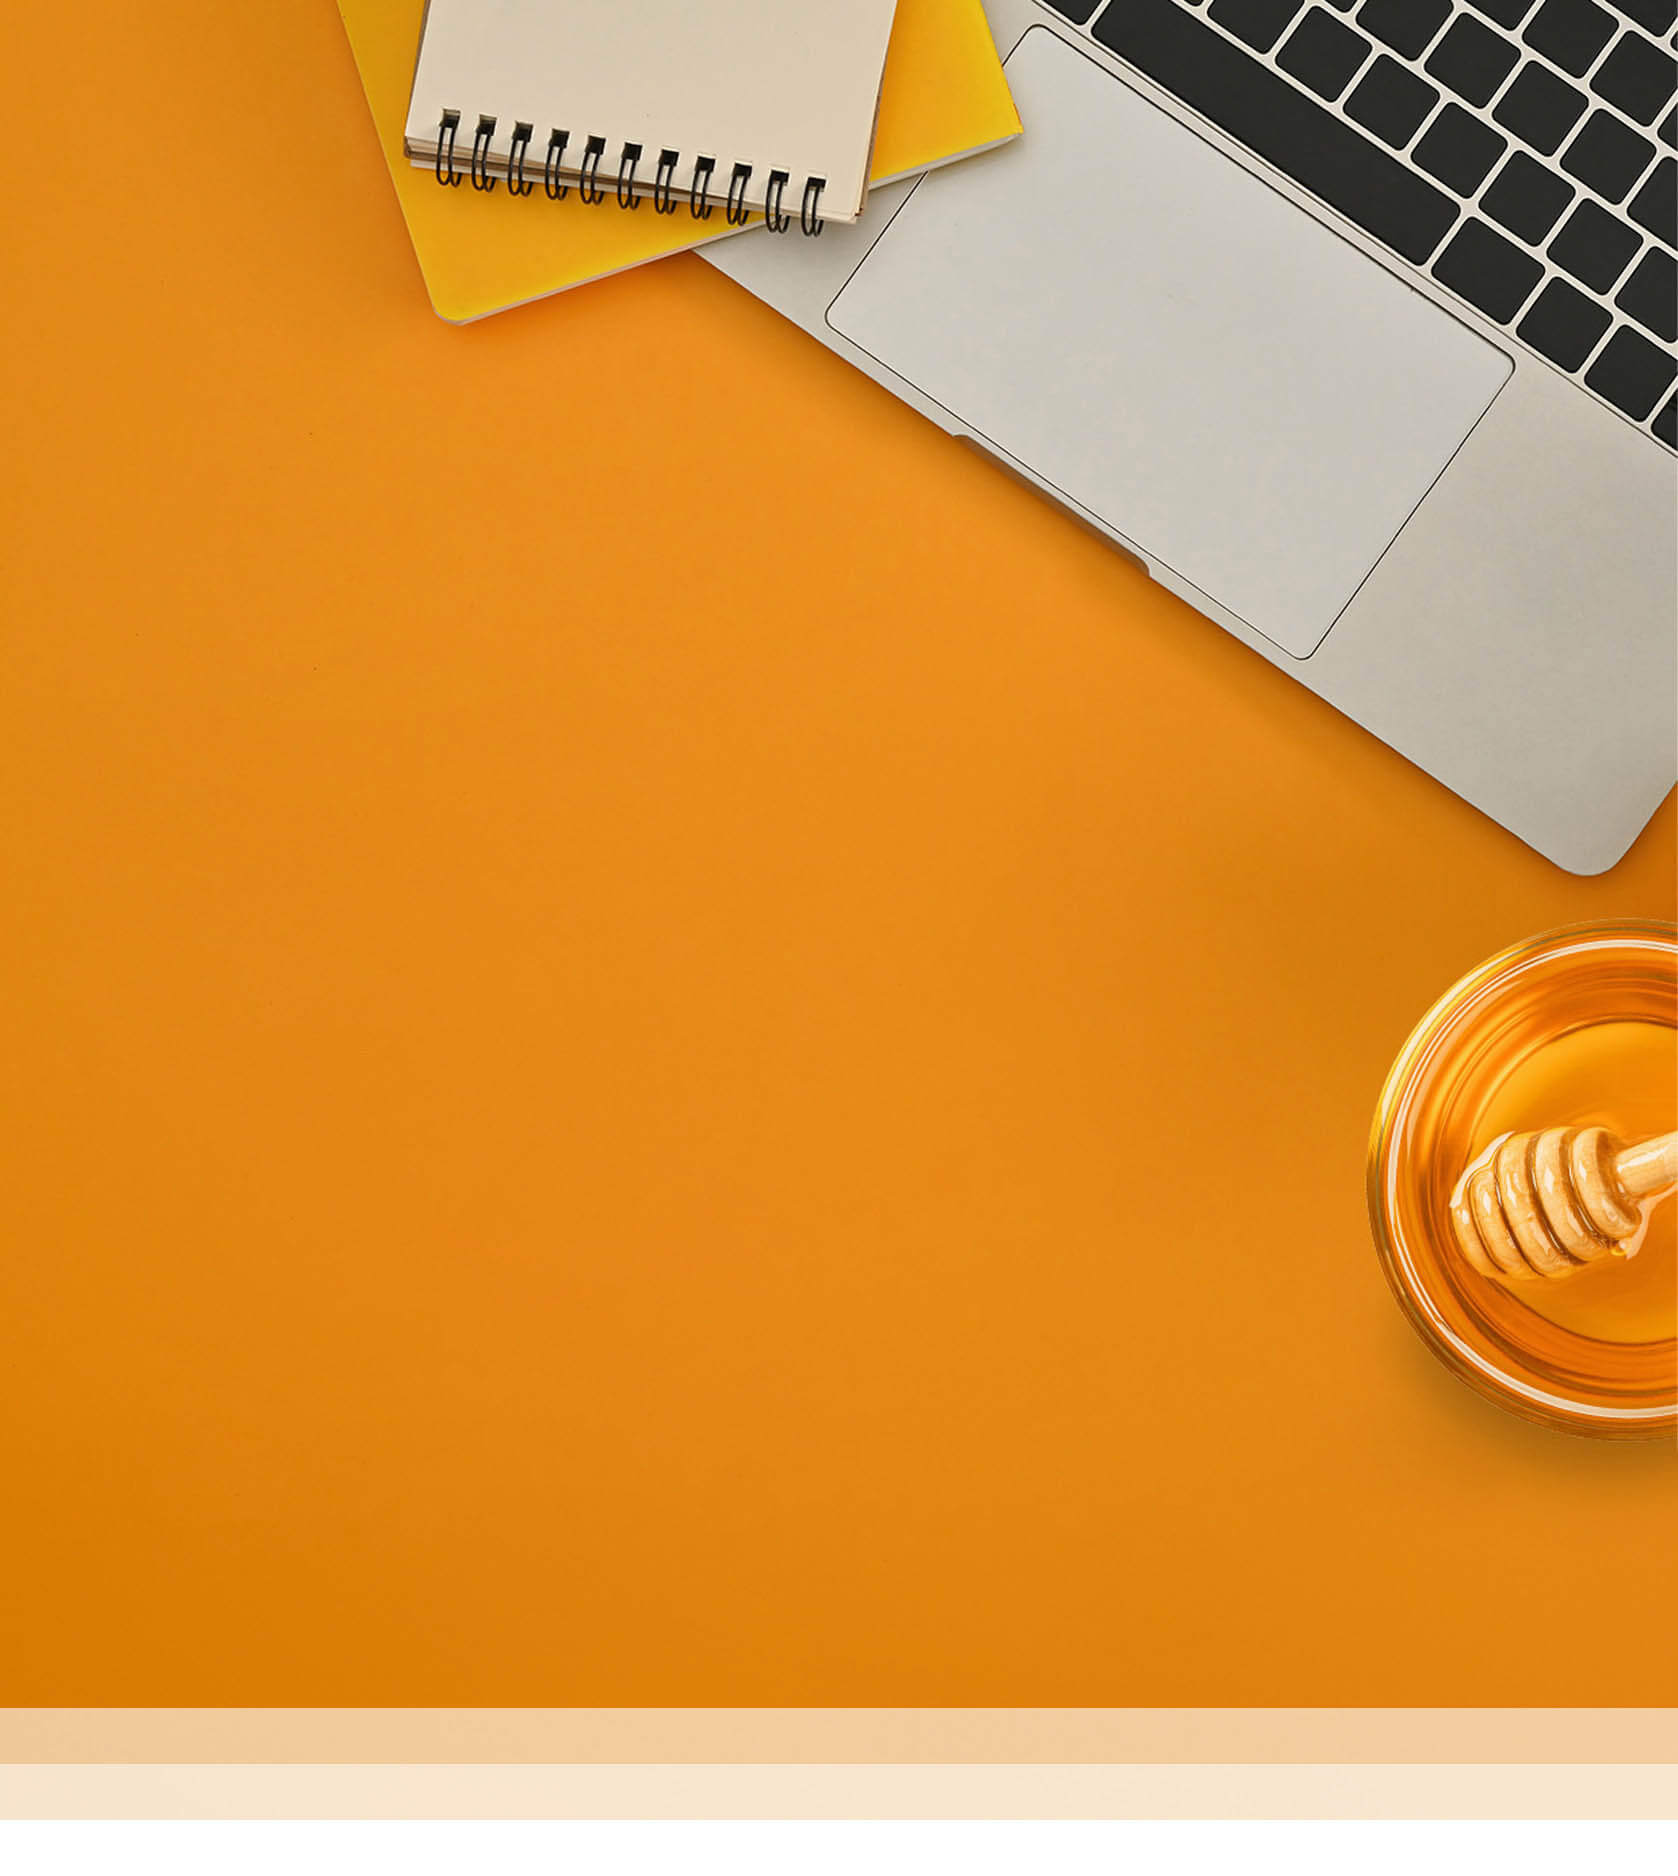 Workspace with laptop, notebook, and honey dipper, on yellow background